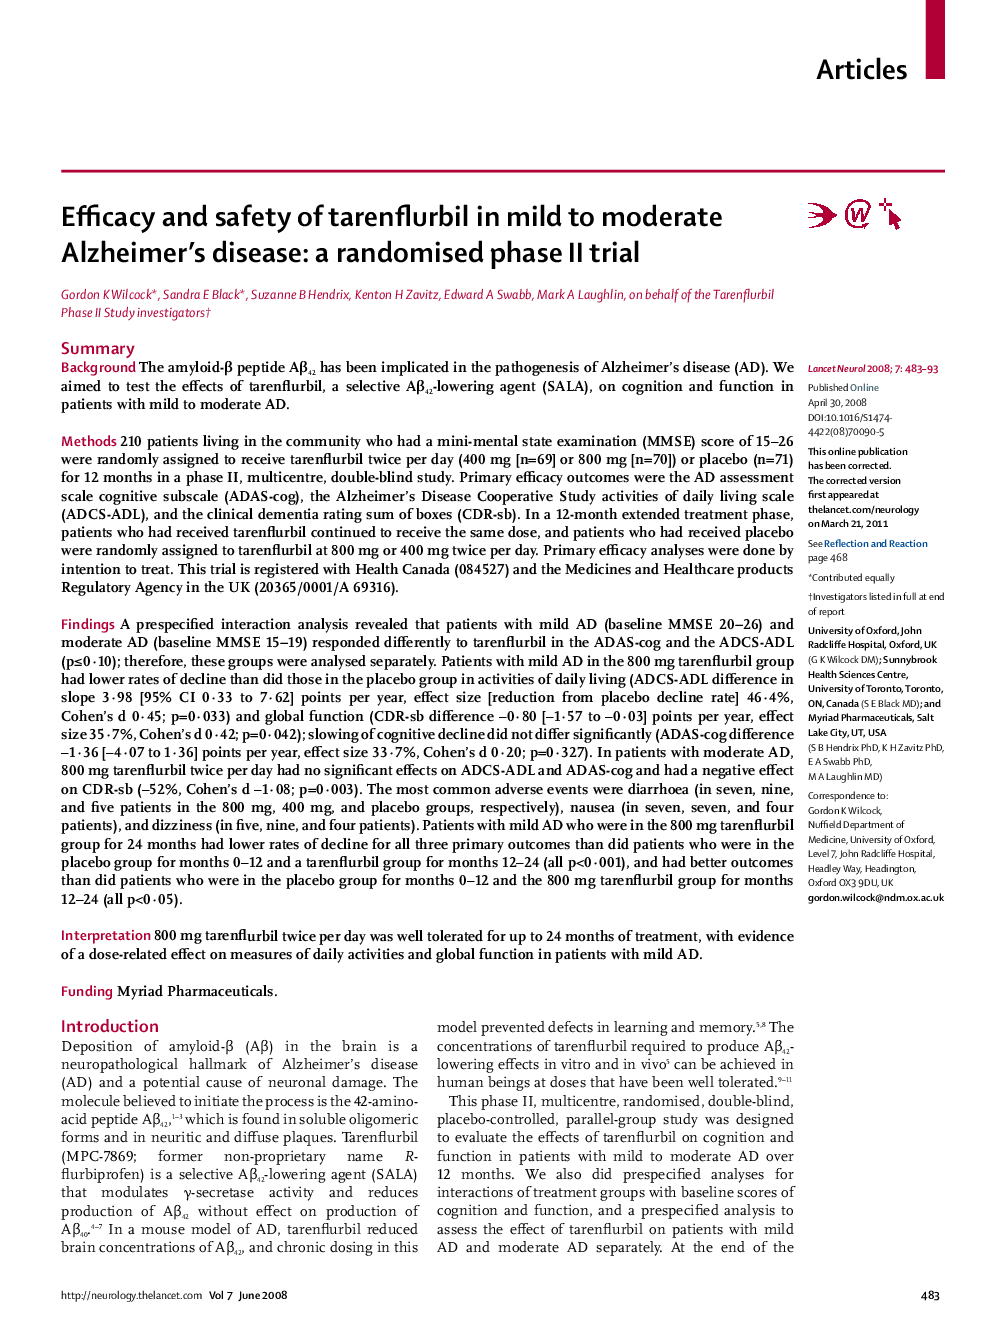 Efficacy and safety of tarenflurbil in mild to moderate Alzheimer's disease: a randomised phase II trial